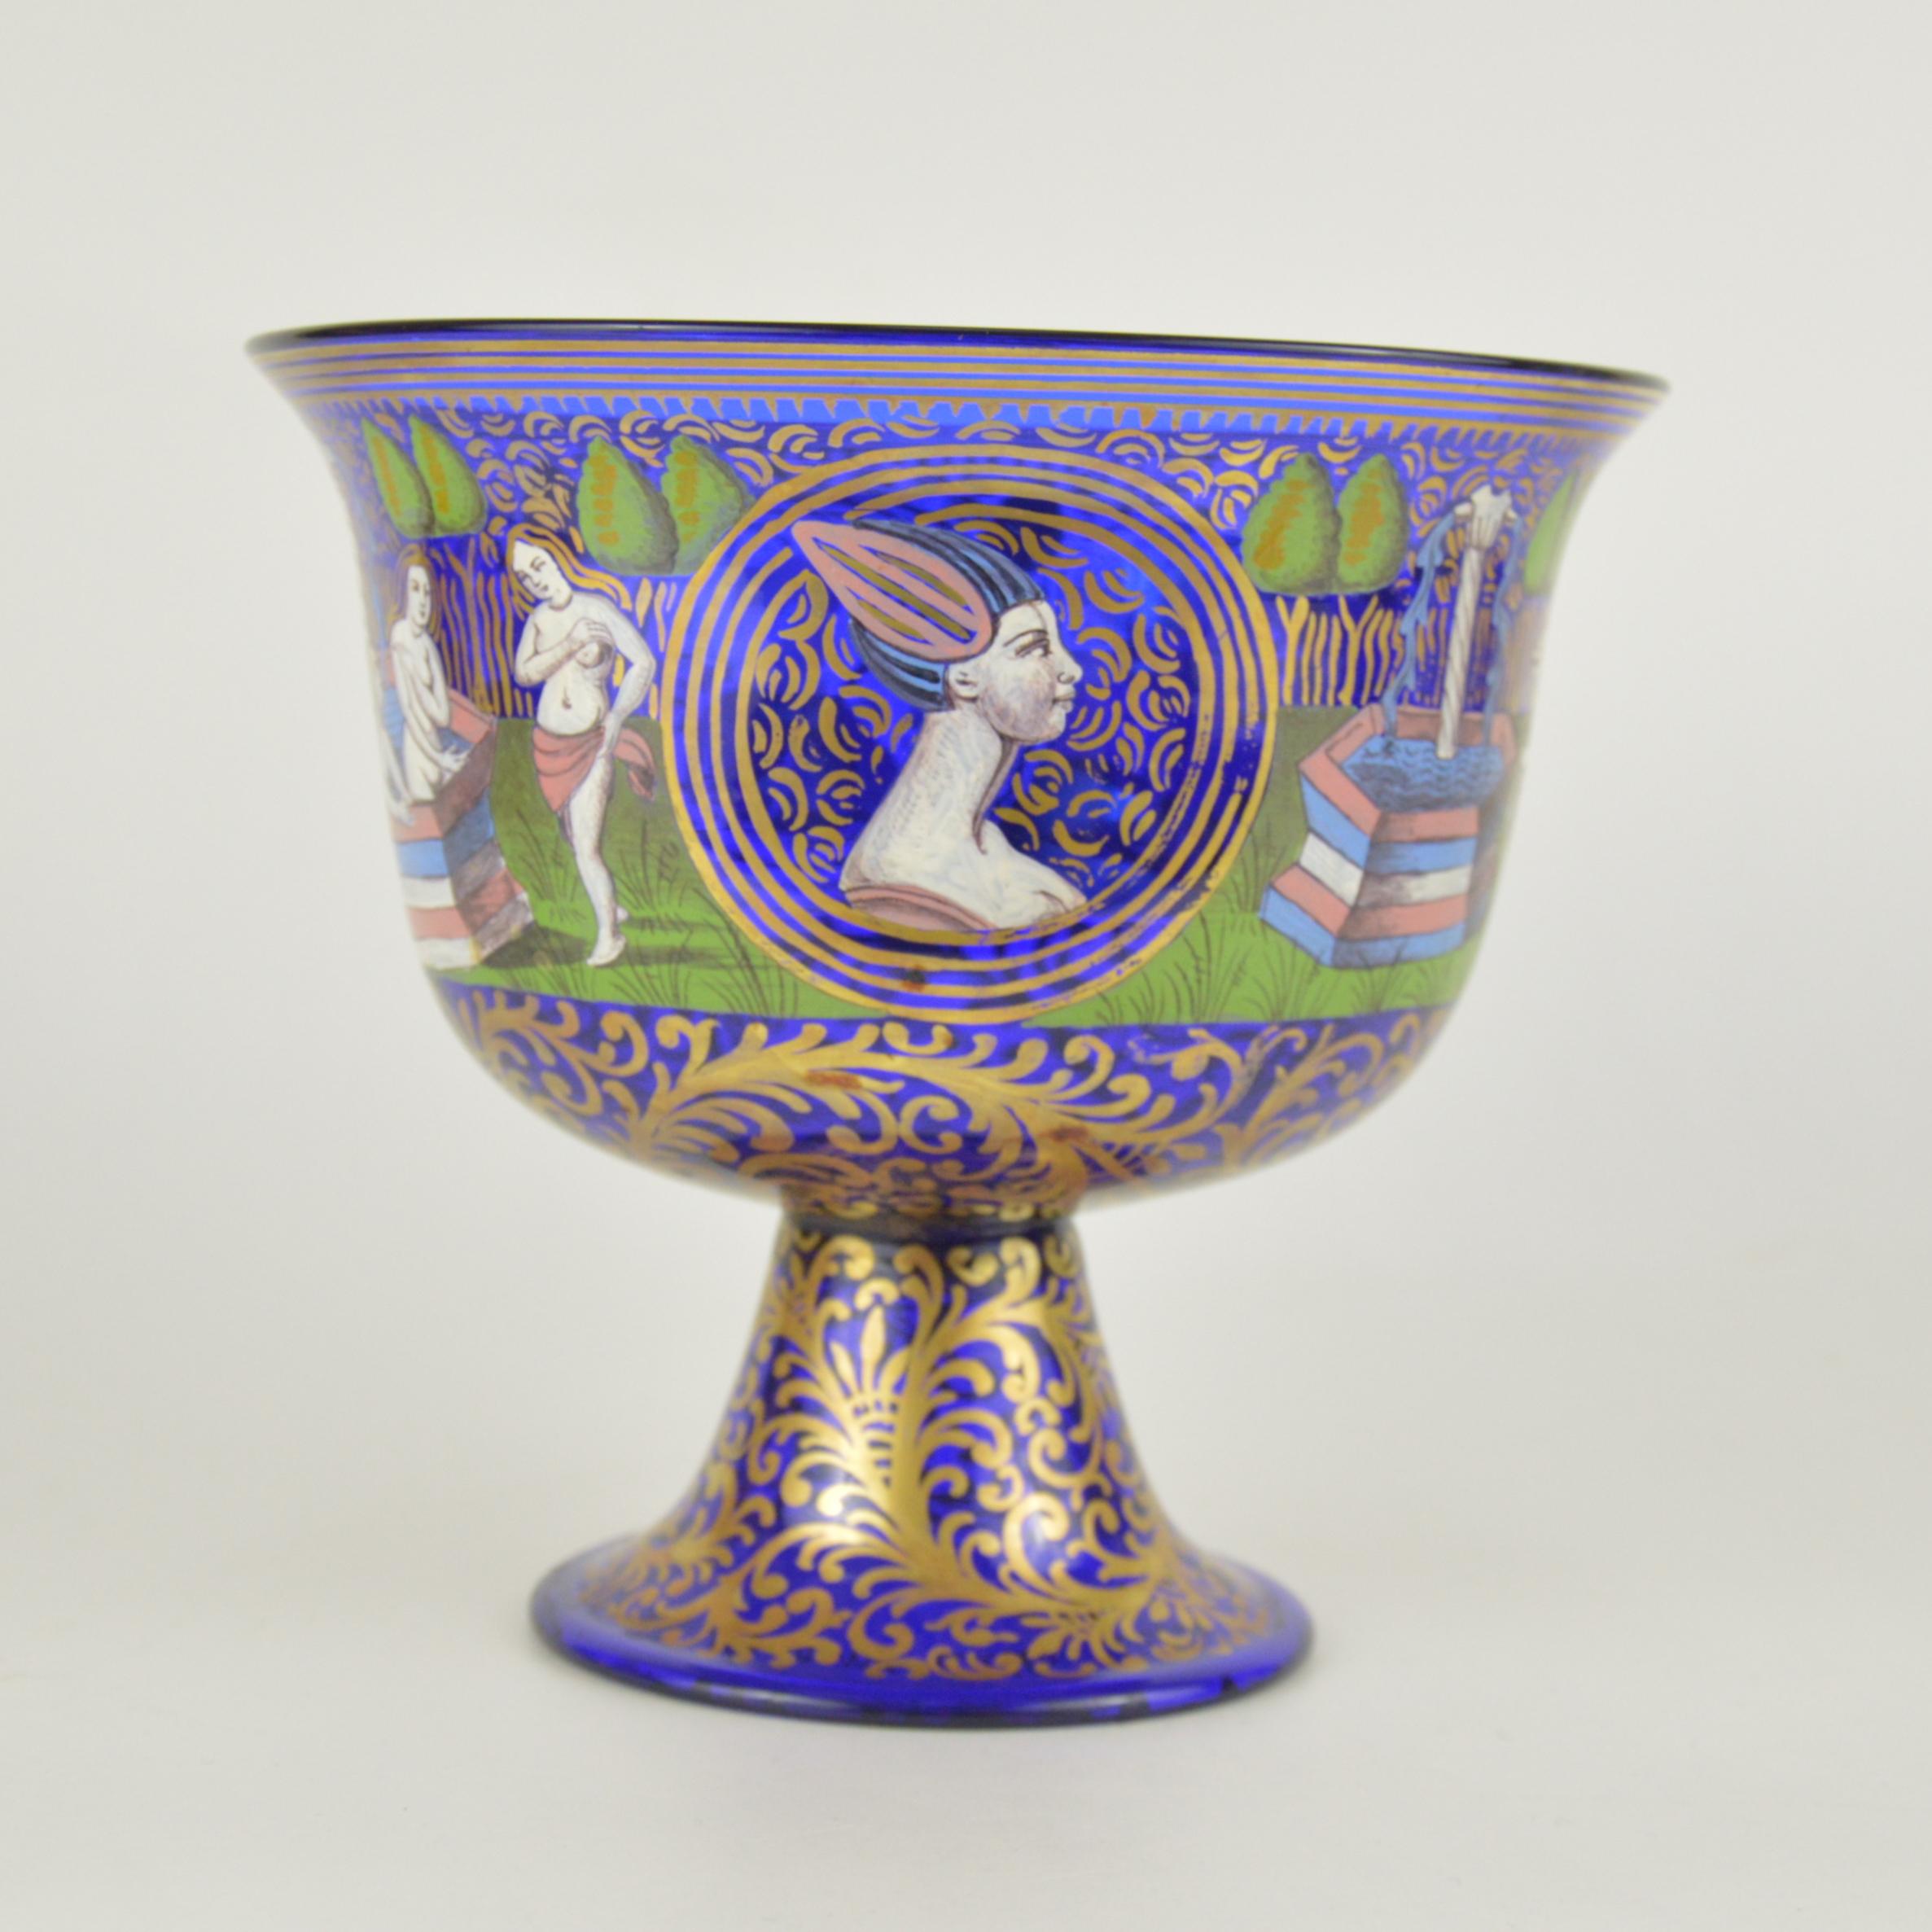 Wedding Murano Cobalt Glass Cup with Enamelled Decoration Albertini Spezzamonte For Sale 2